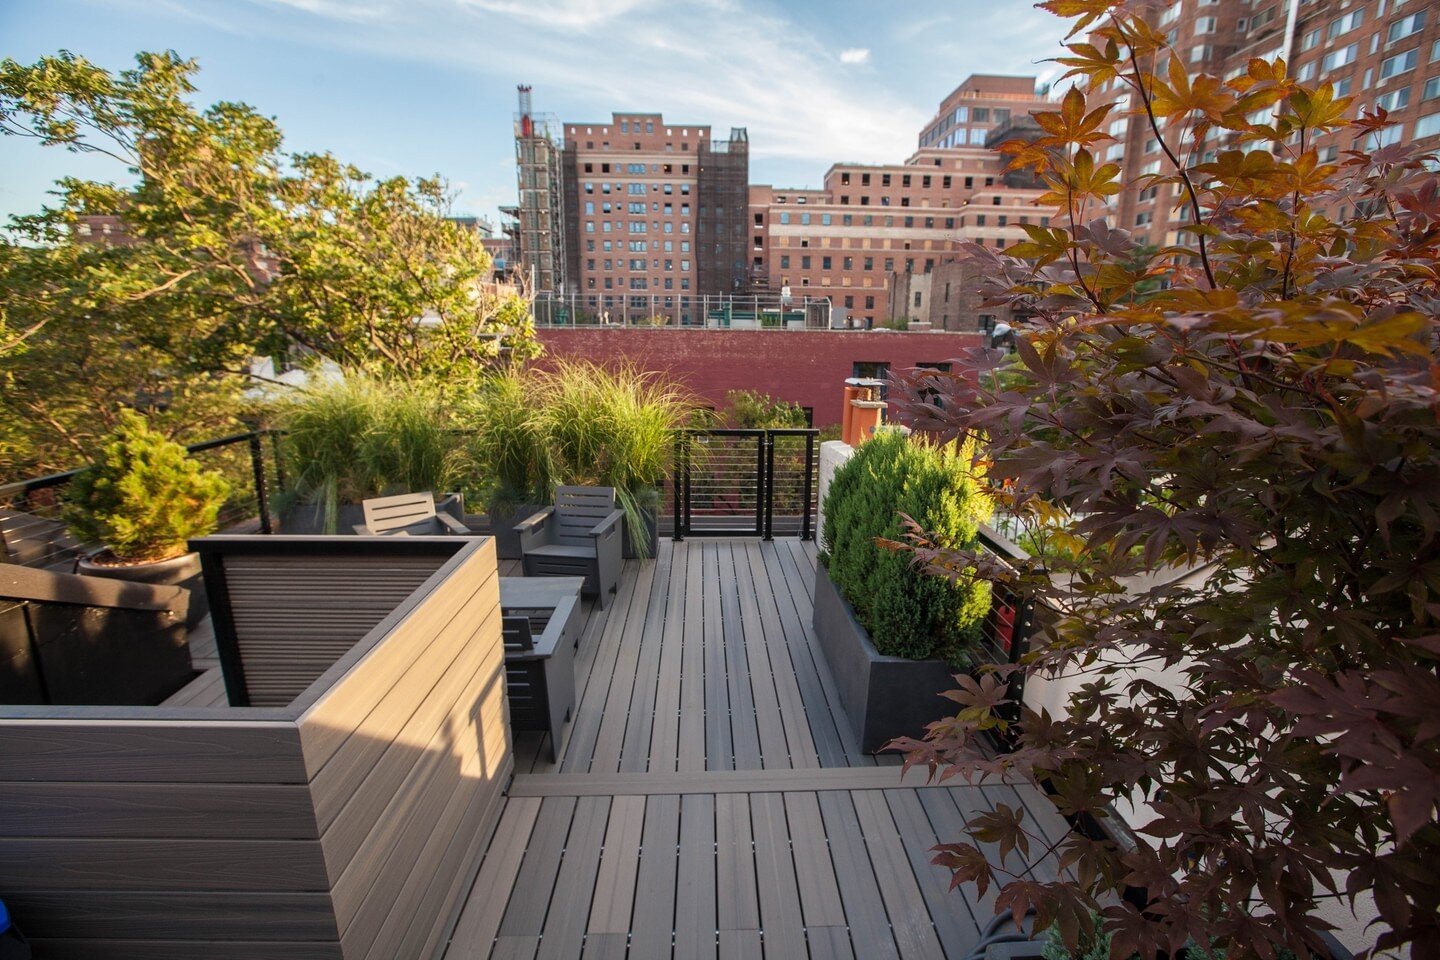 When you need need a little fresh air...⁠
.⁠
.⁠
.⁠
#nyc #nyclandscape #nycoutdoors #nycgreenspace  #sustainablelandscapes ⁠#urbangarden #rooftopgarden #nycgarden #brooklyngarden⁠